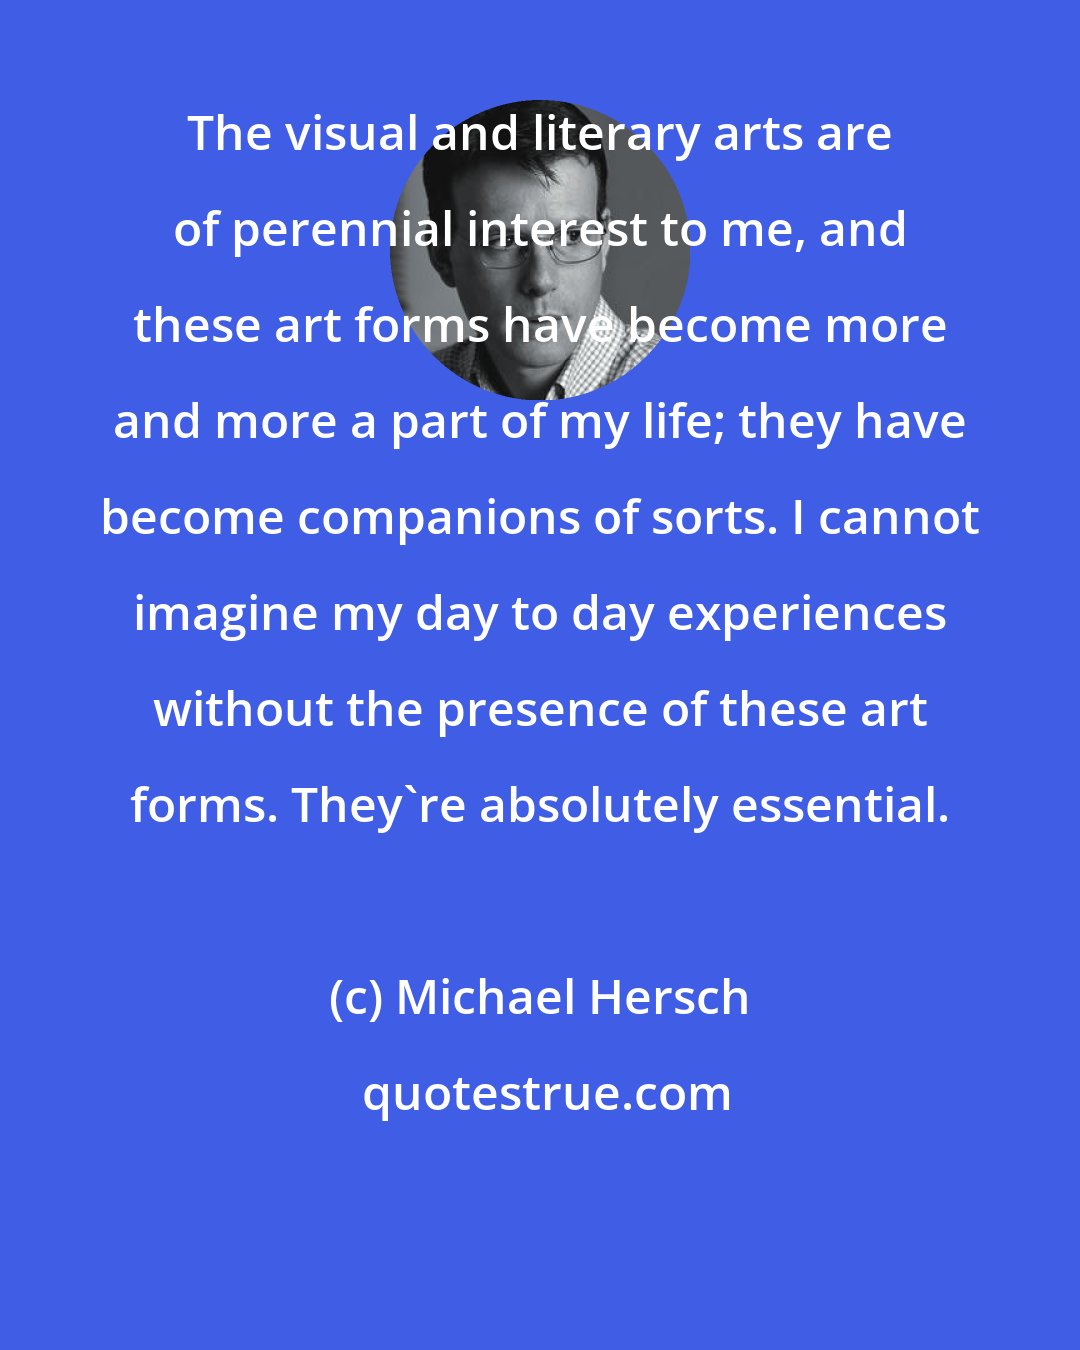 Michael Hersch: The visual and literary arts are of perennial interest to me, and these art forms have become more and more a part of my life; they have become companions of sorts. I cannot imagine my day to day experiences without the presence of these art forms. They're absolutely essential.